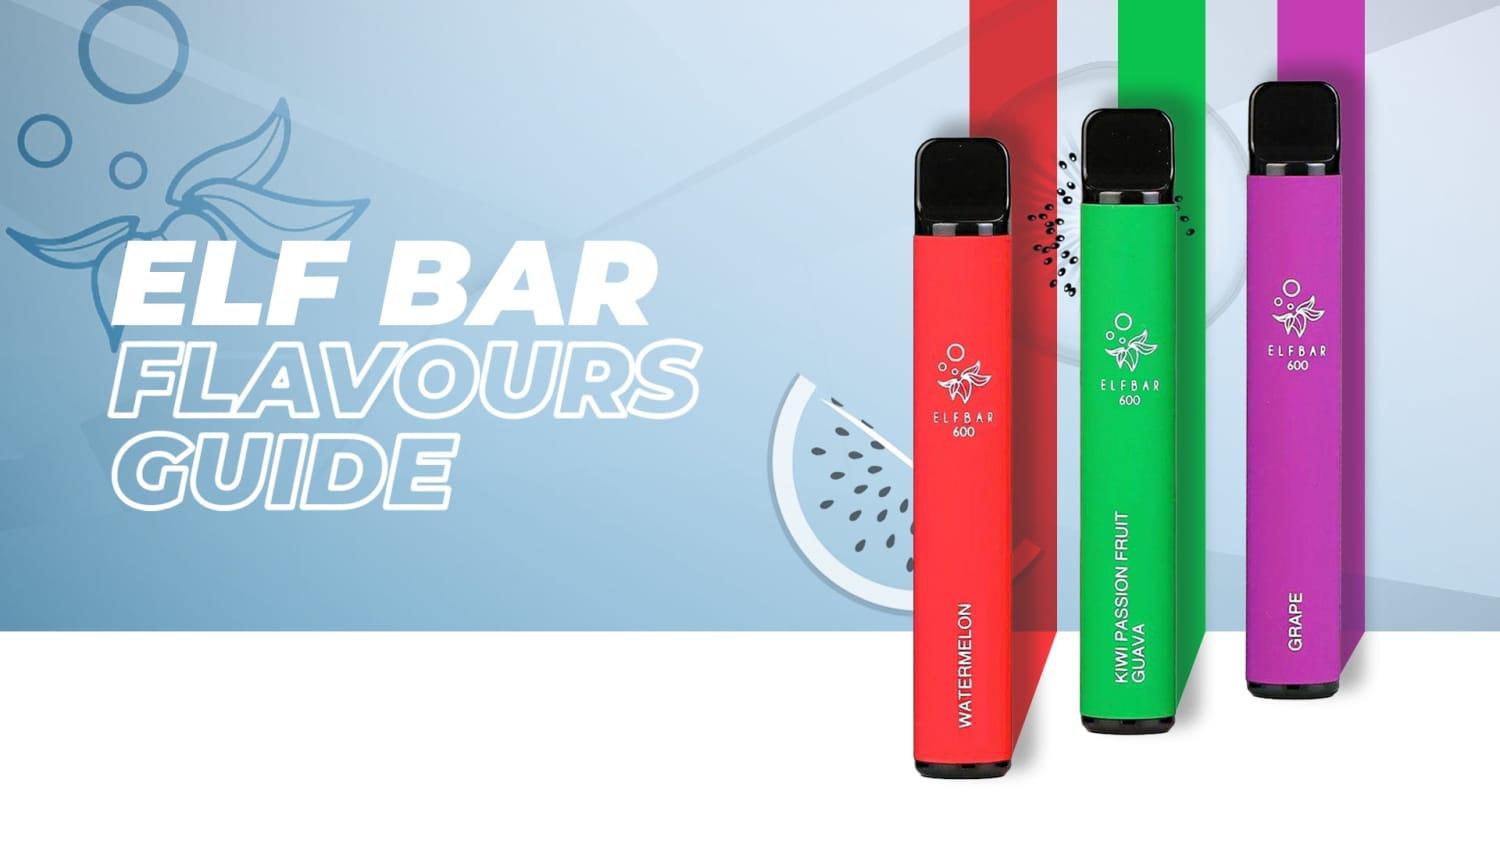 Elf Bar Flavours Guide - Brand:Elf Bar, Category:Vape Kits, Sub Category:Disposables